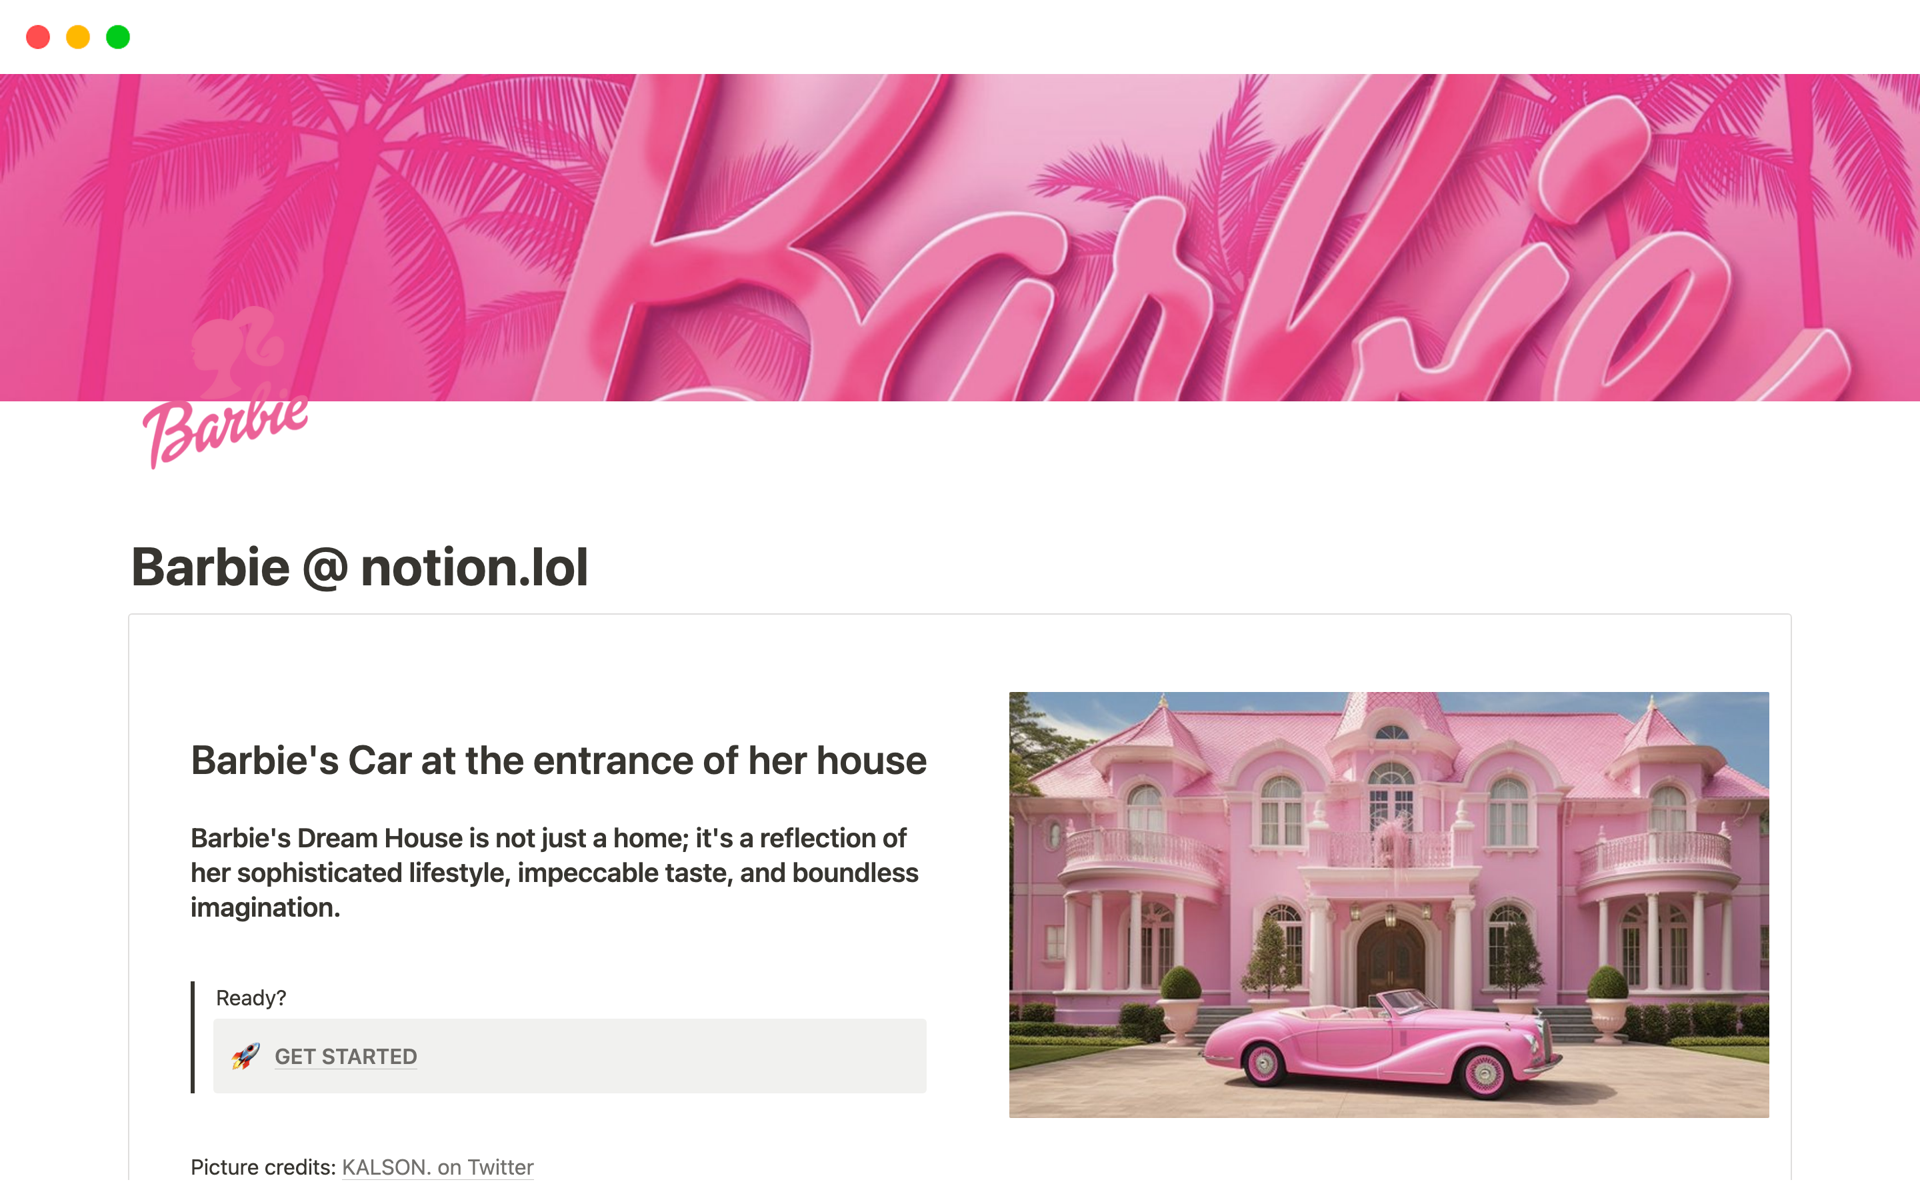 This is a Notion template dedicated to the spectacular movie called Barbie released this month.